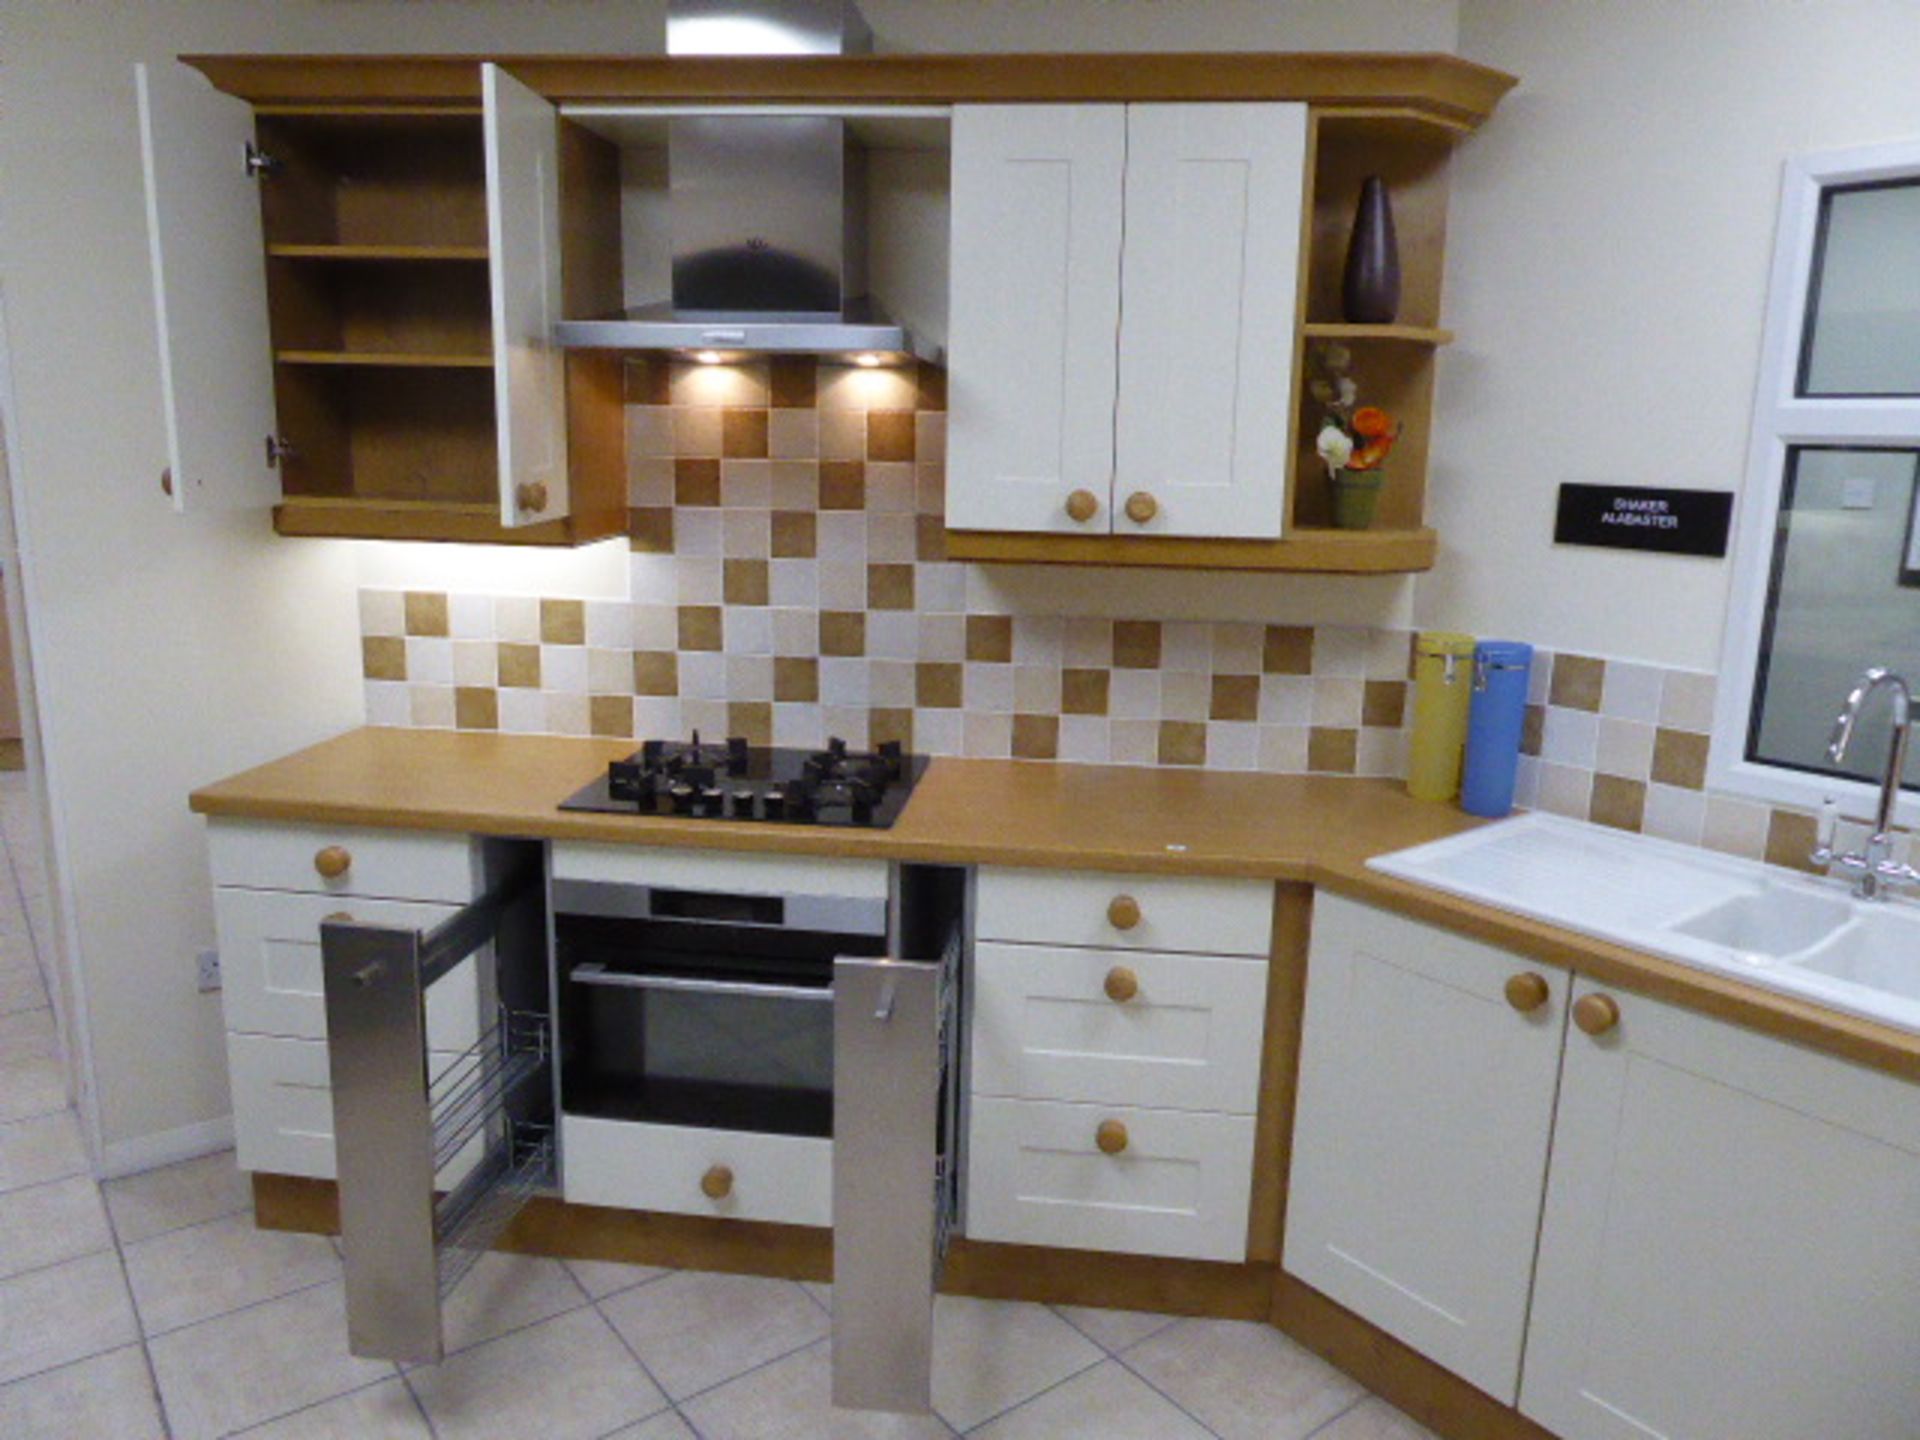 Shaker alabaster kitchen with oak wood laminate worktops. Max measurement is 380cm x 210cm. With - Image 5 of 10